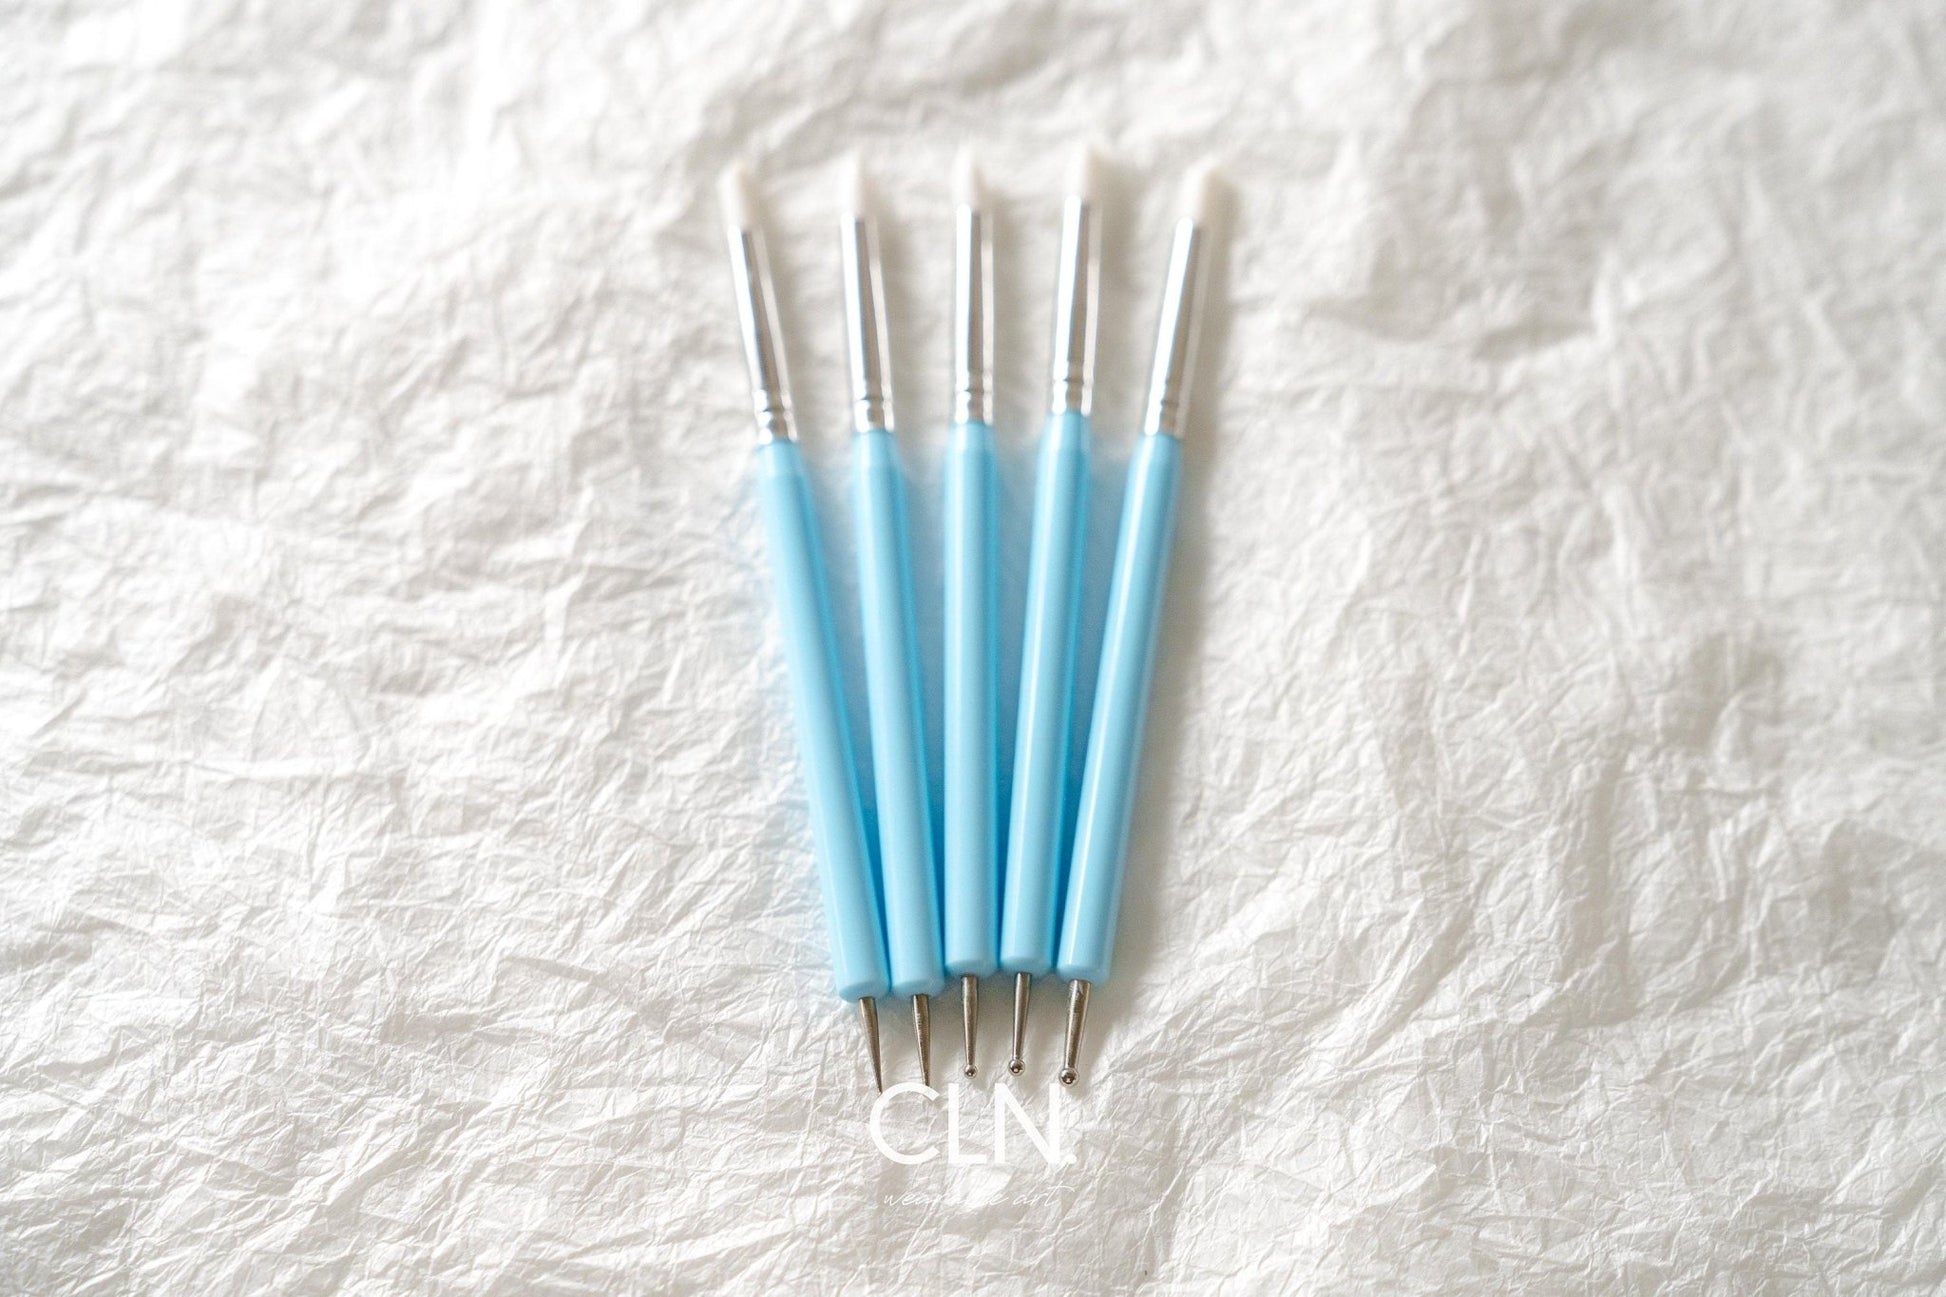 Dotting tool with silicone tips - Curated tools - CLN Atelier